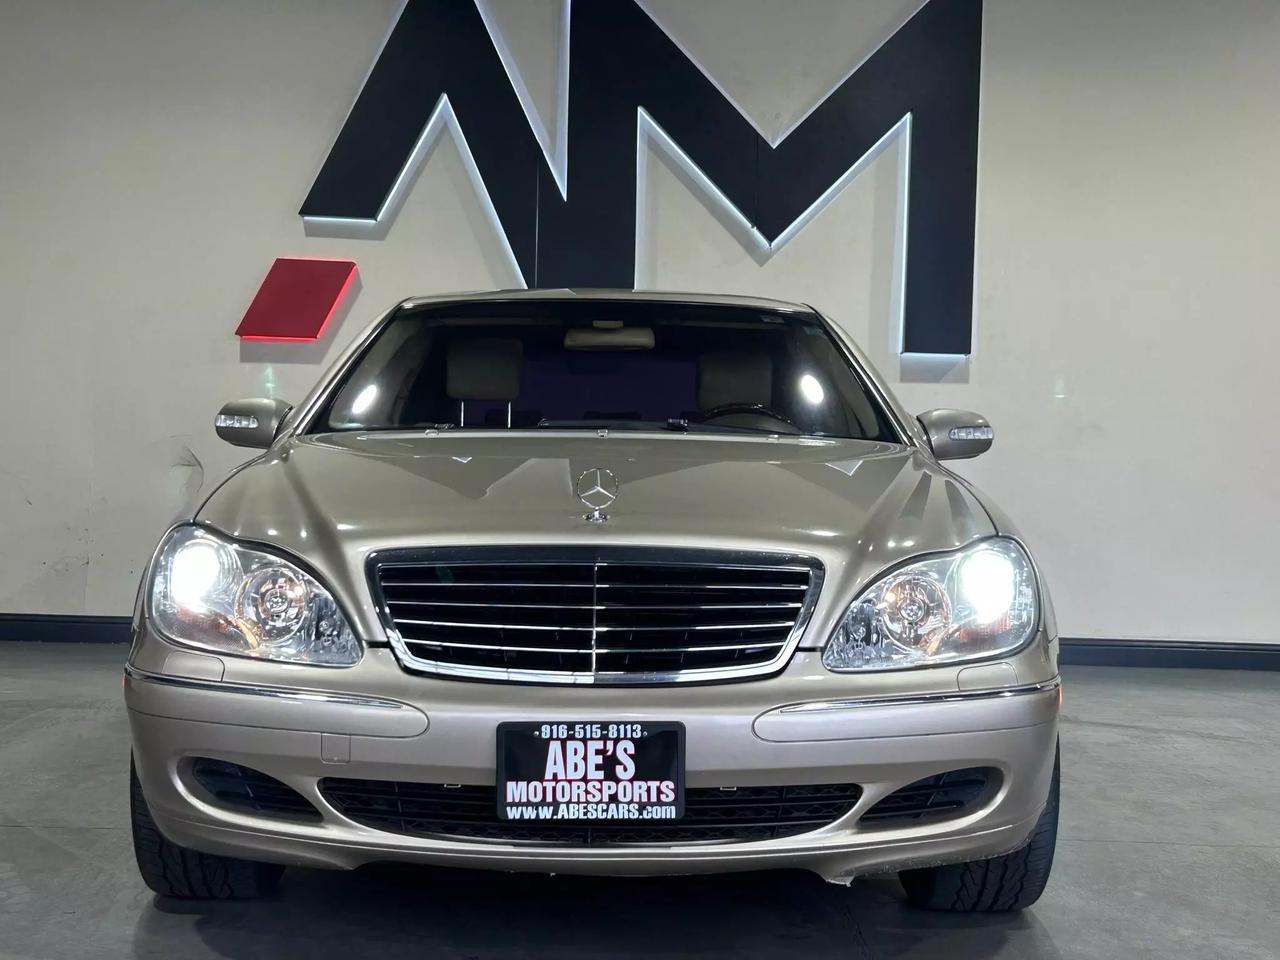 Used 2003 Mercedes-Benz S-Class S500 with VIN WDBNG84J13A349619 for sale in Sacramento, CA